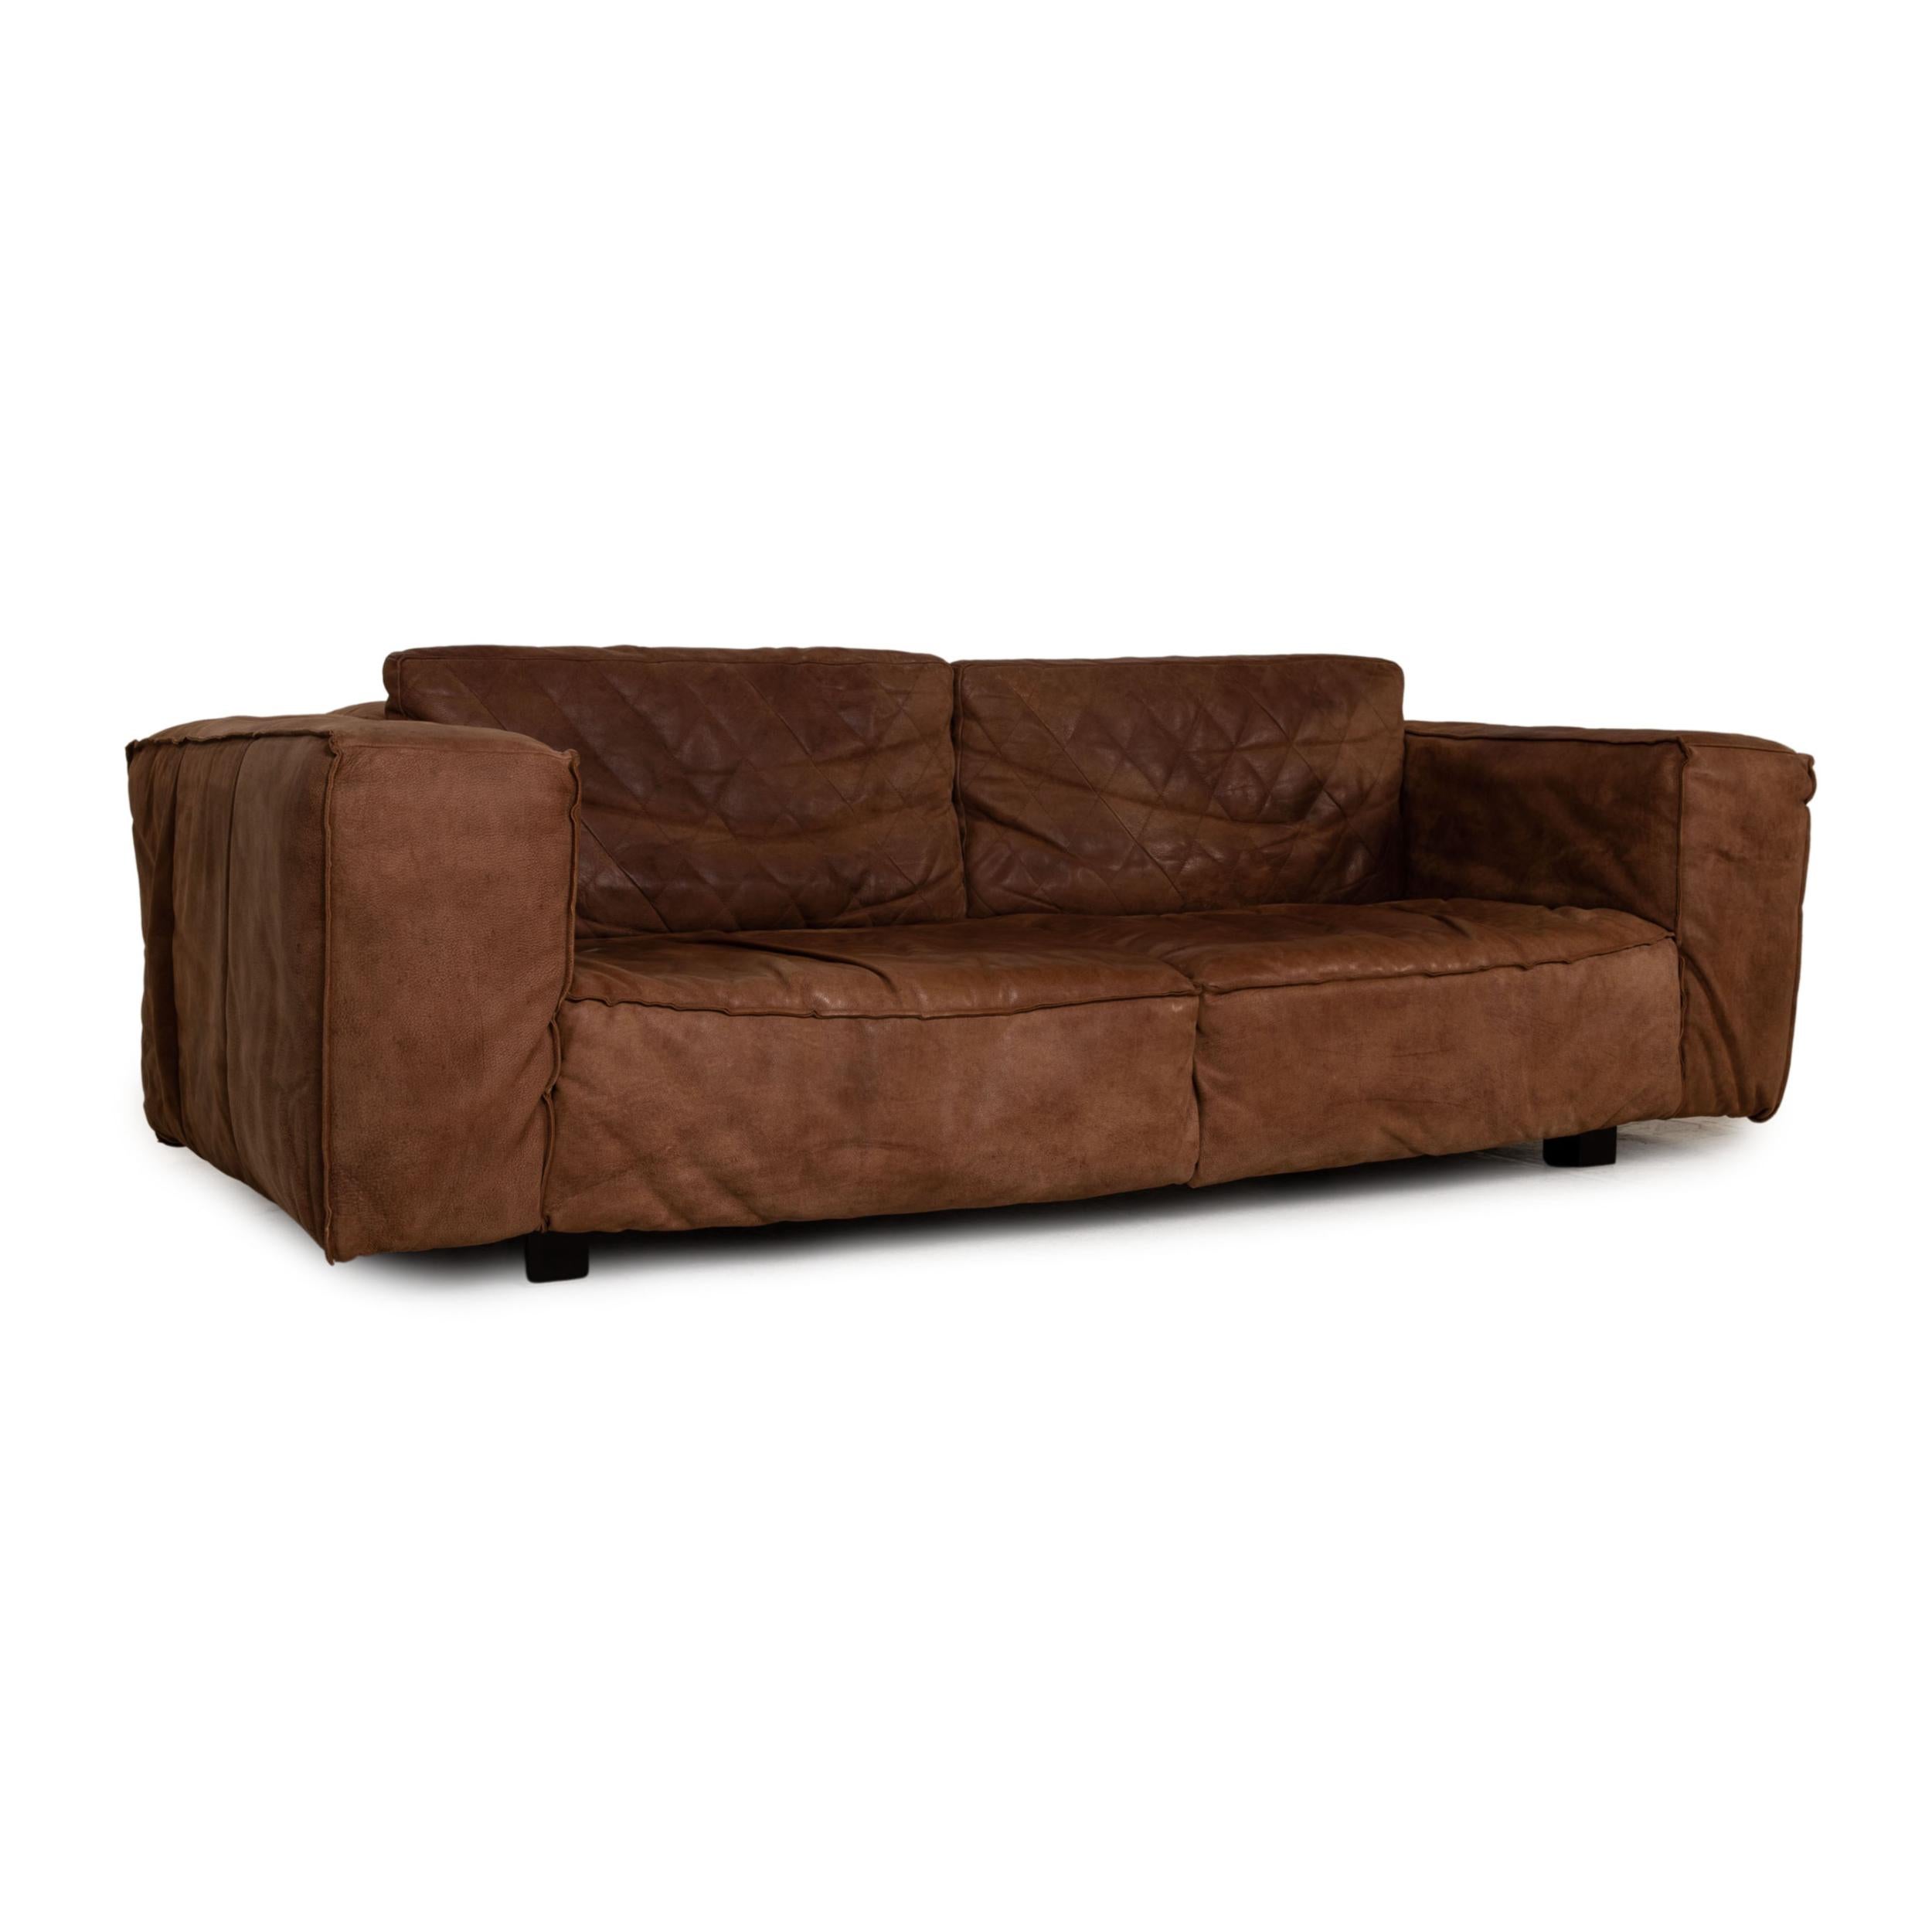 Tommy M by Machalke Leather Sofa Brown Four-Seater Couch In Excellent Condition For Sale In Cologne, DE